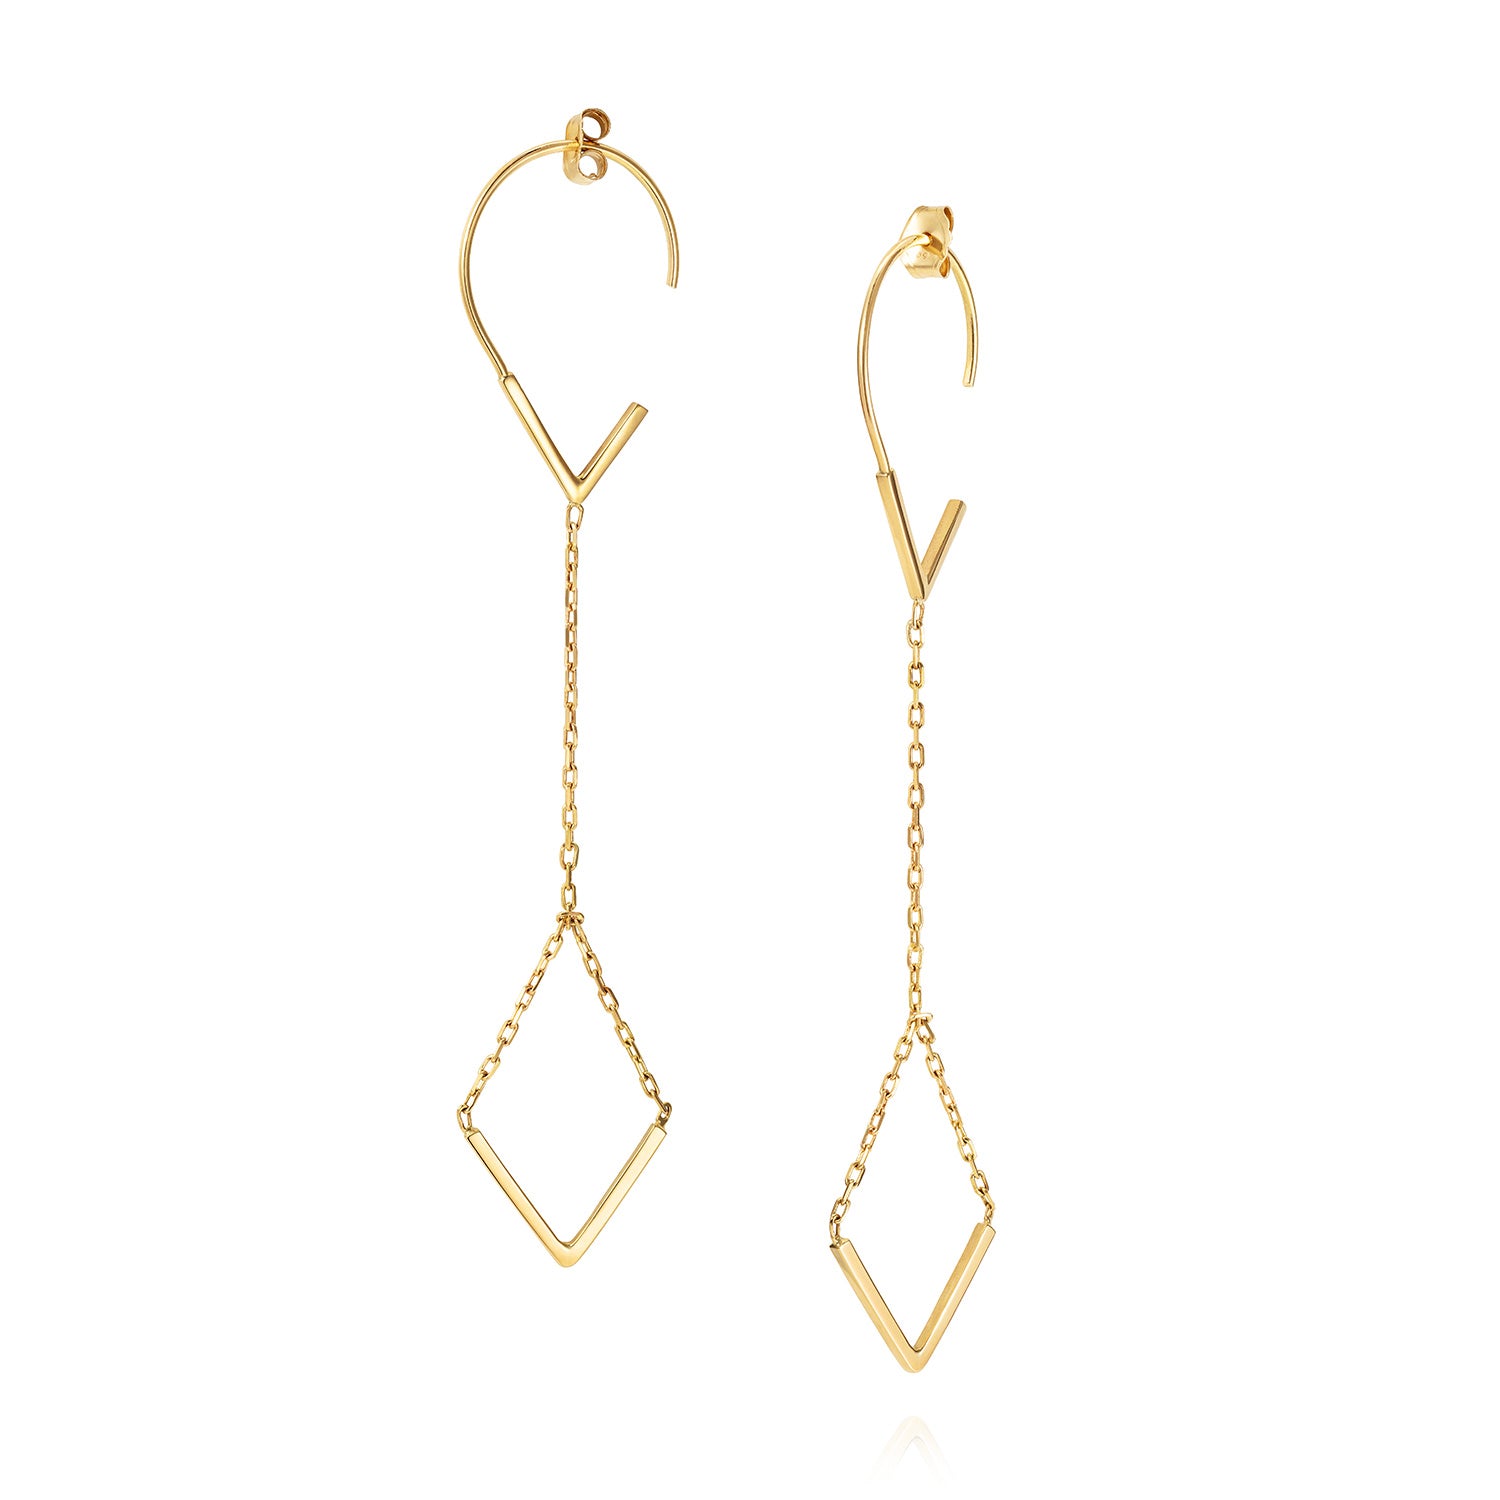 18ct yellow gold hook earrings with V-shaped drops